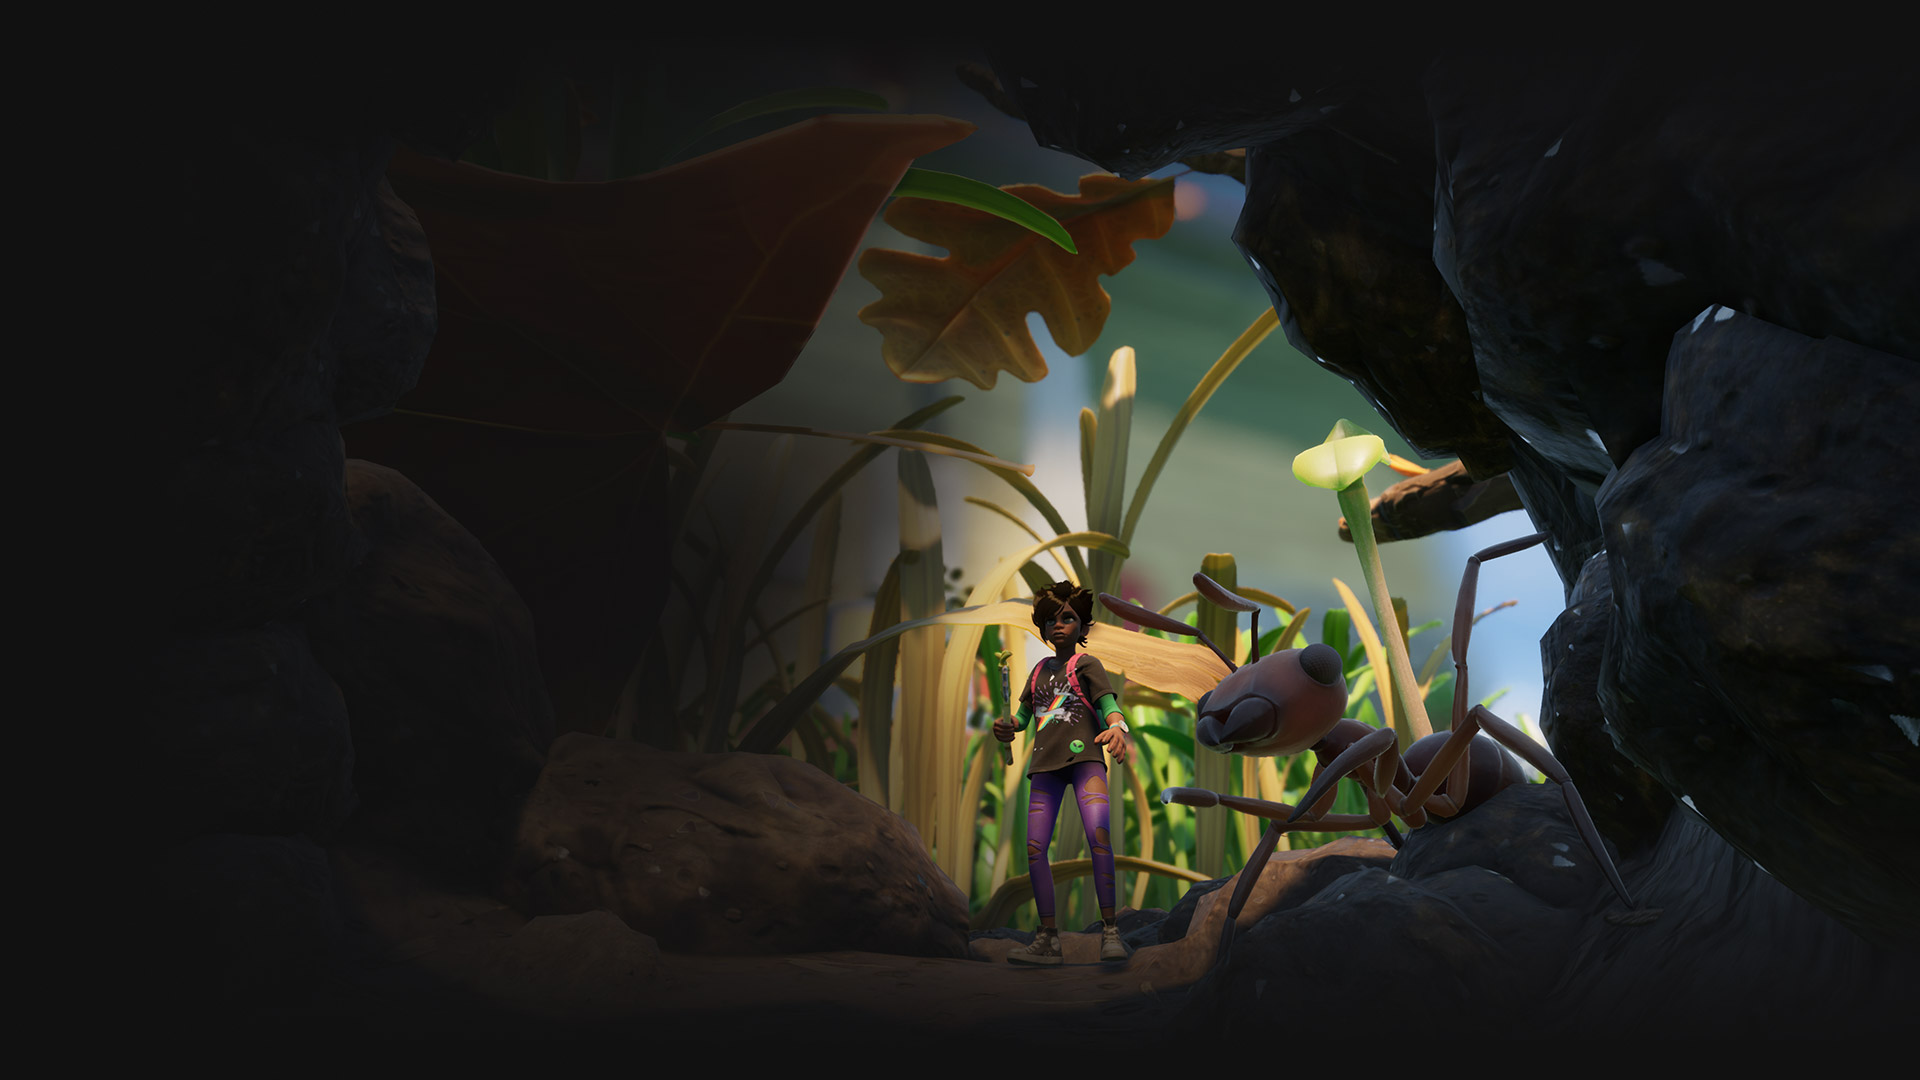 A character wielding a stick encounters a giant ant in a scene from Grounded